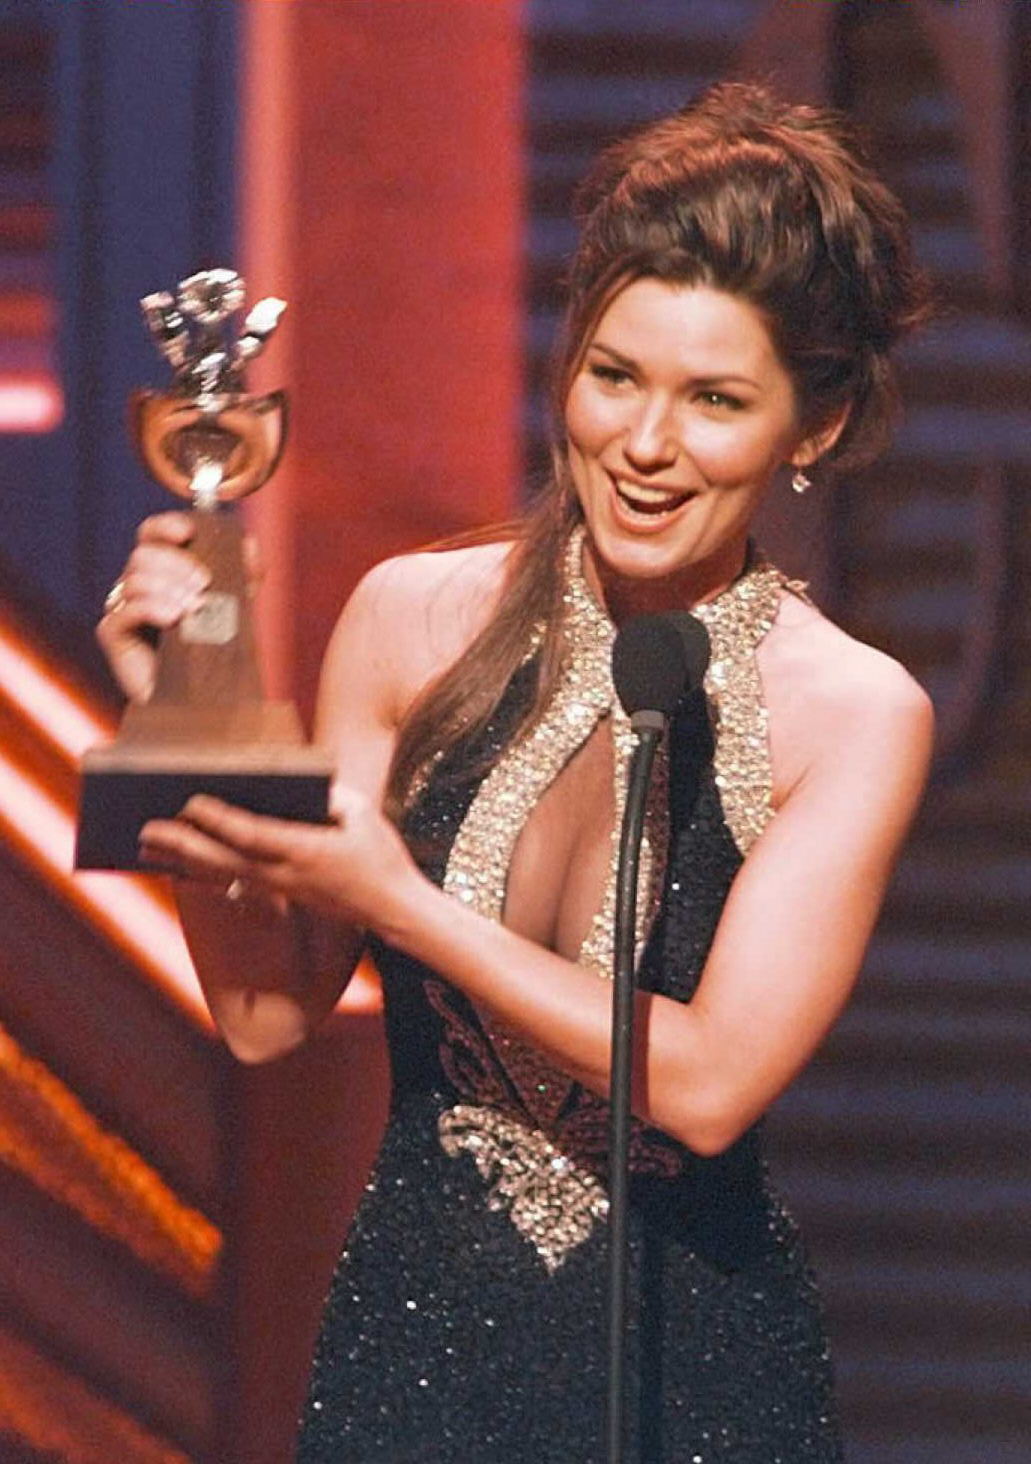 Shania Twain bei den 31 Annual Country Music Awards am 19. April 1996 | Quelle: Getty Images